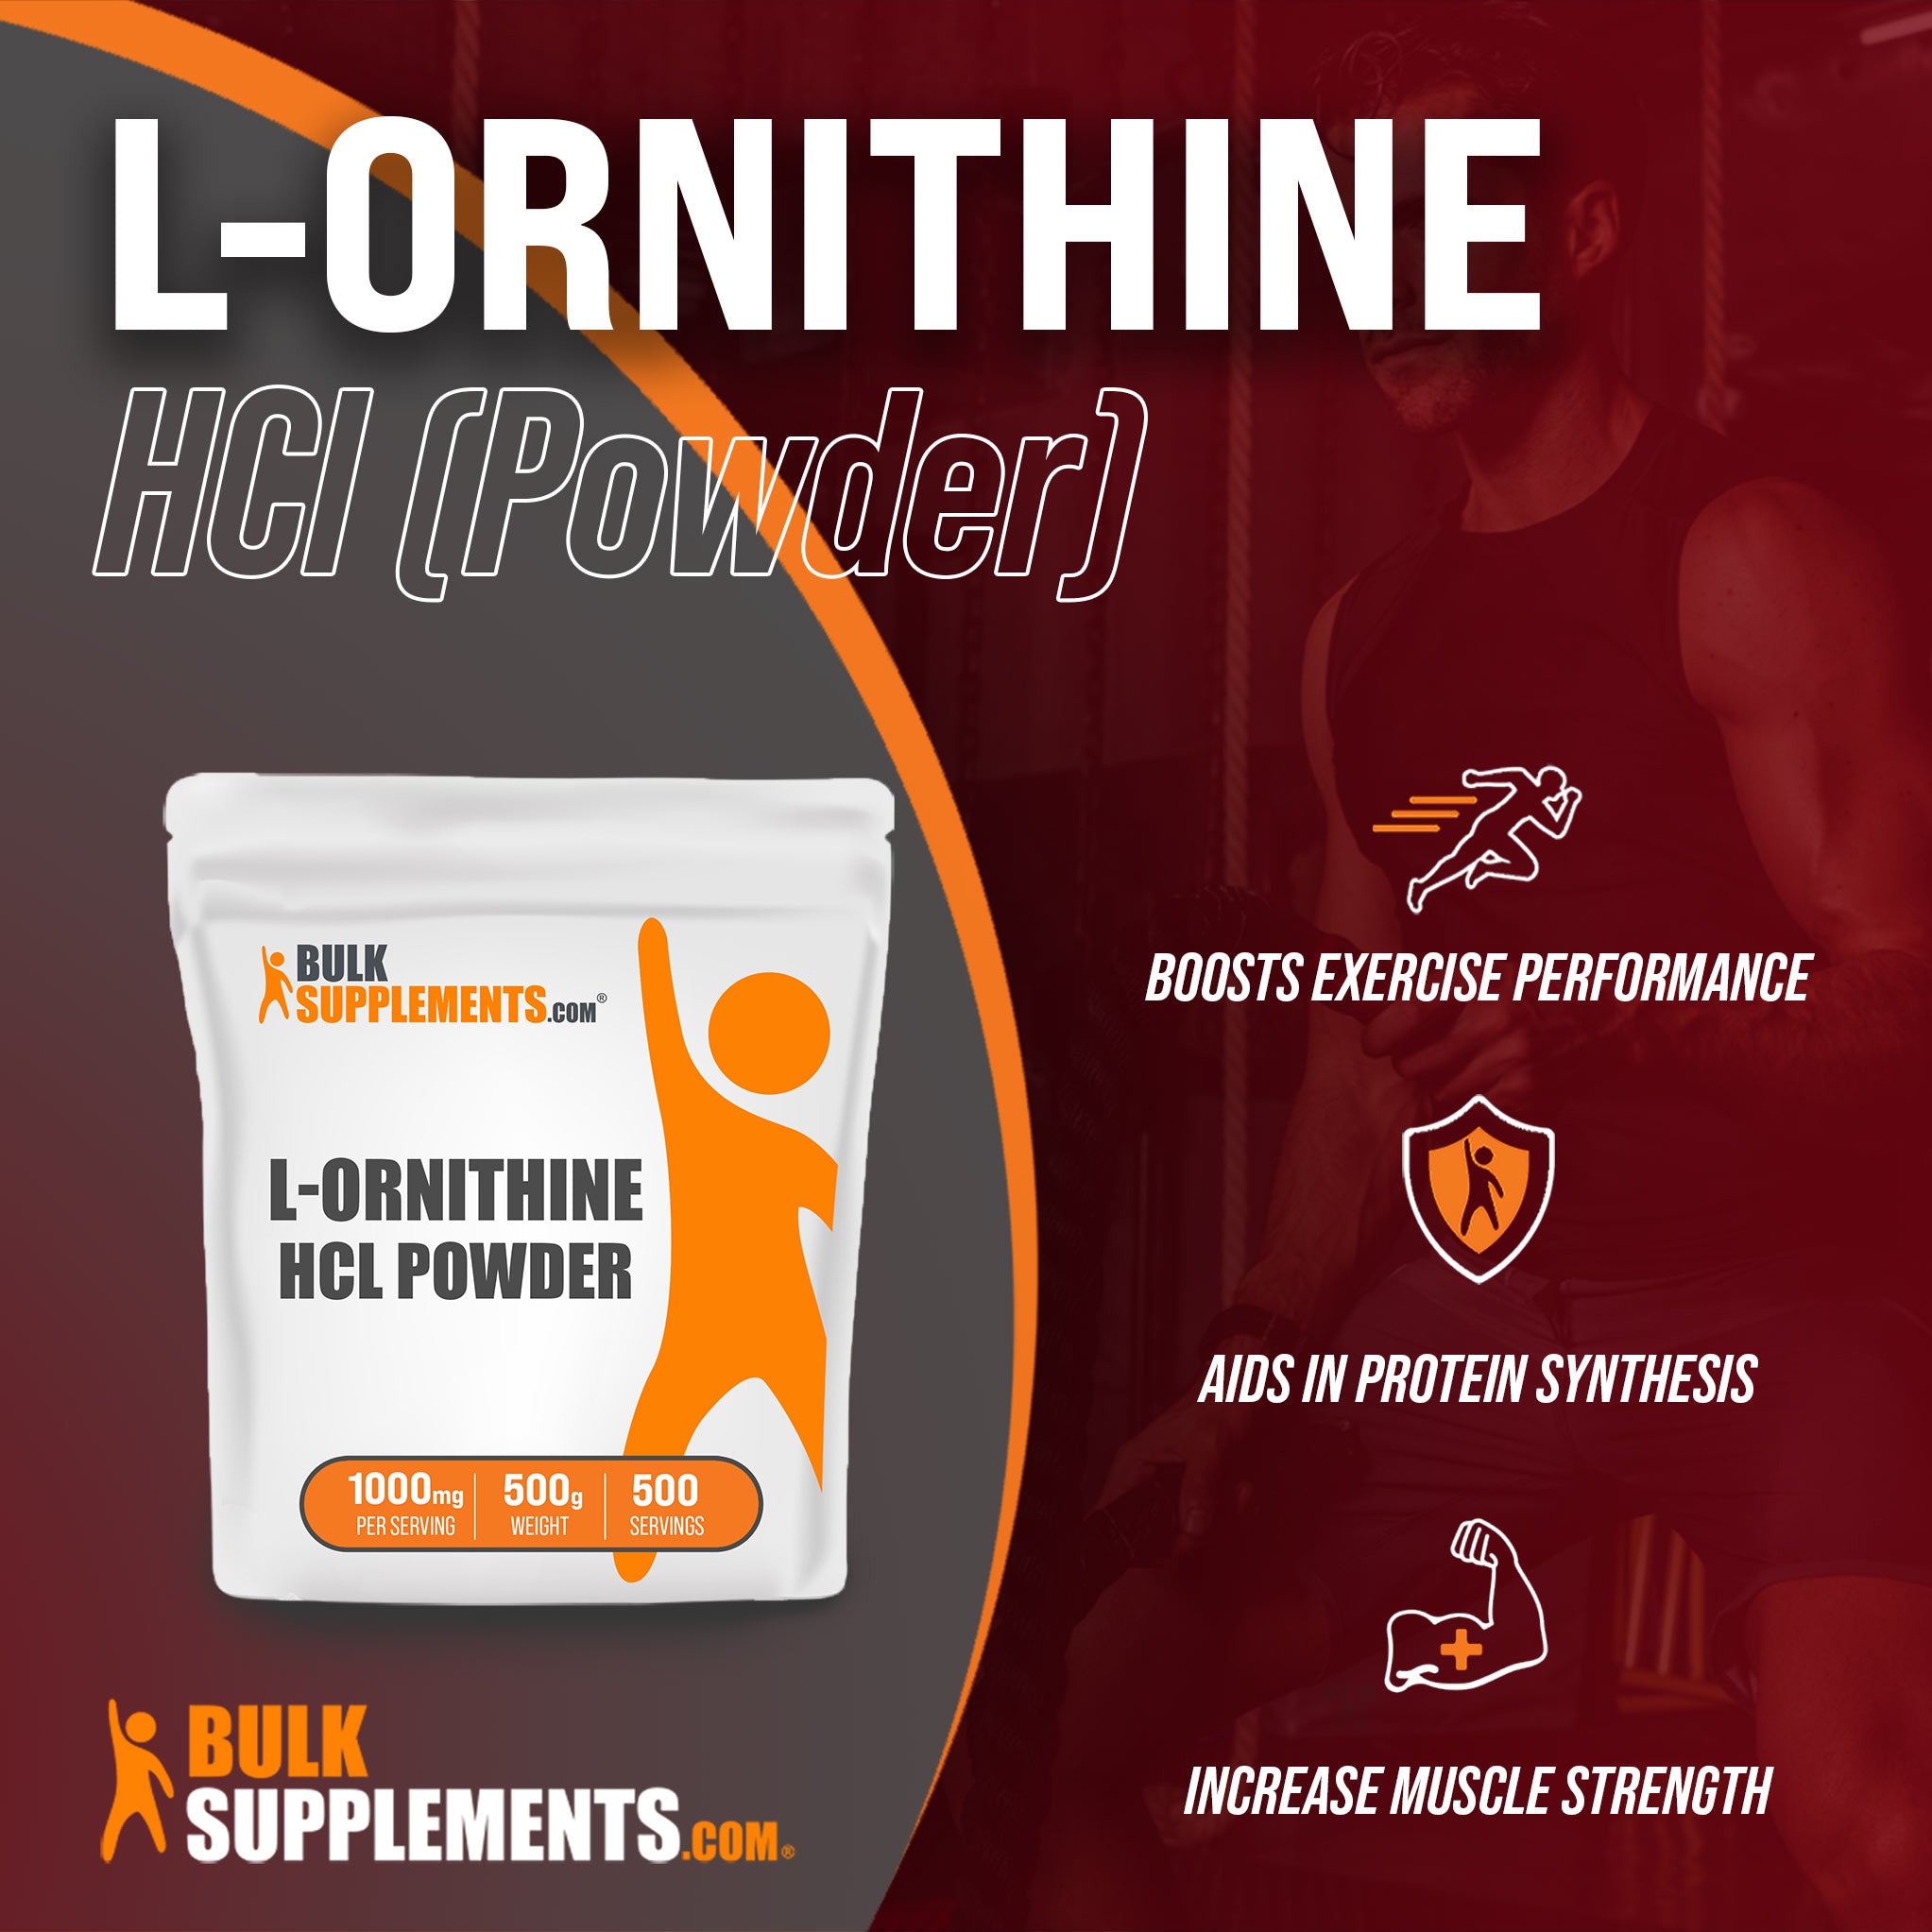 Benefits of L-Ornithine HCl: boosts exercise performance, aids in protein synthesis, increase muscle strength